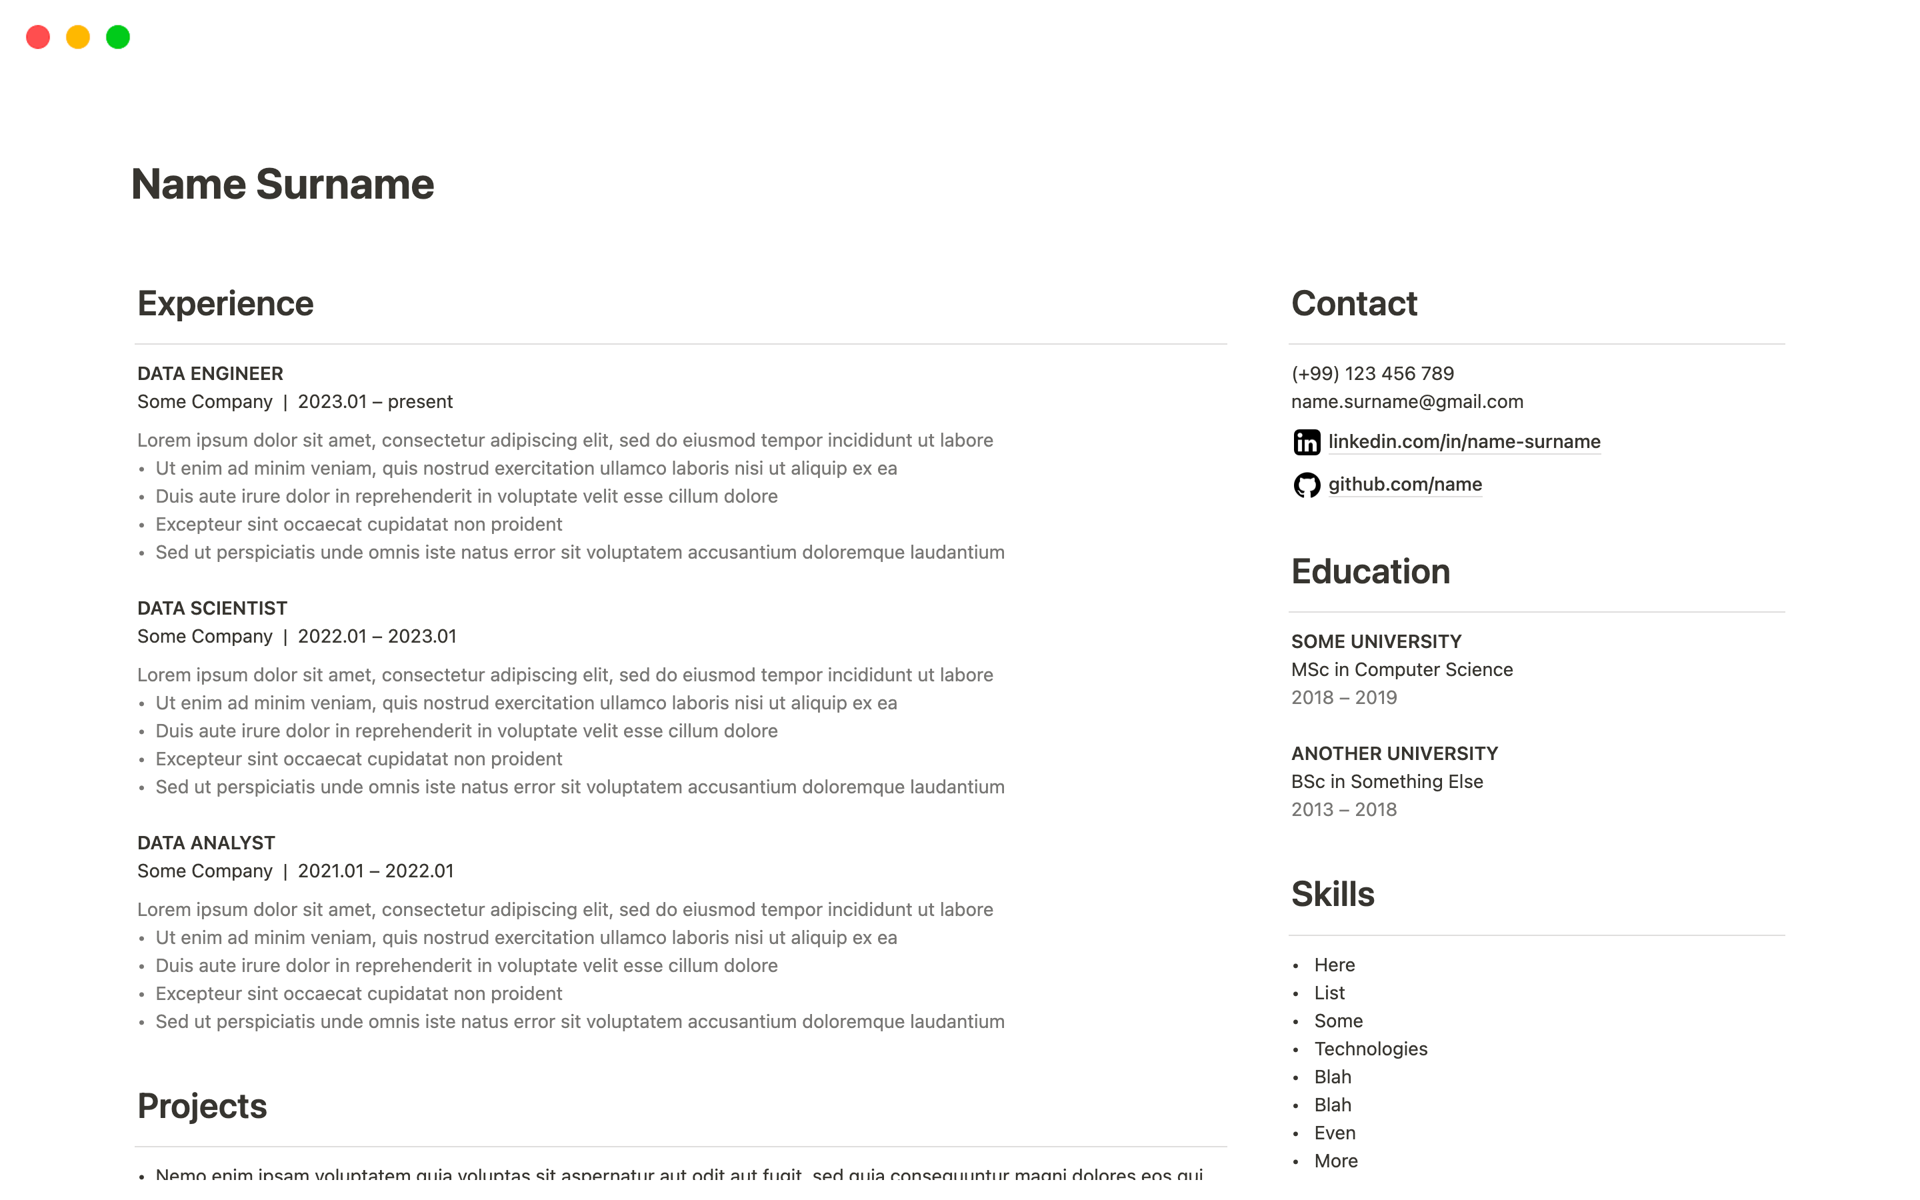 Clear and simple, minimalist resume.
Intended to export as 1-page PDF.